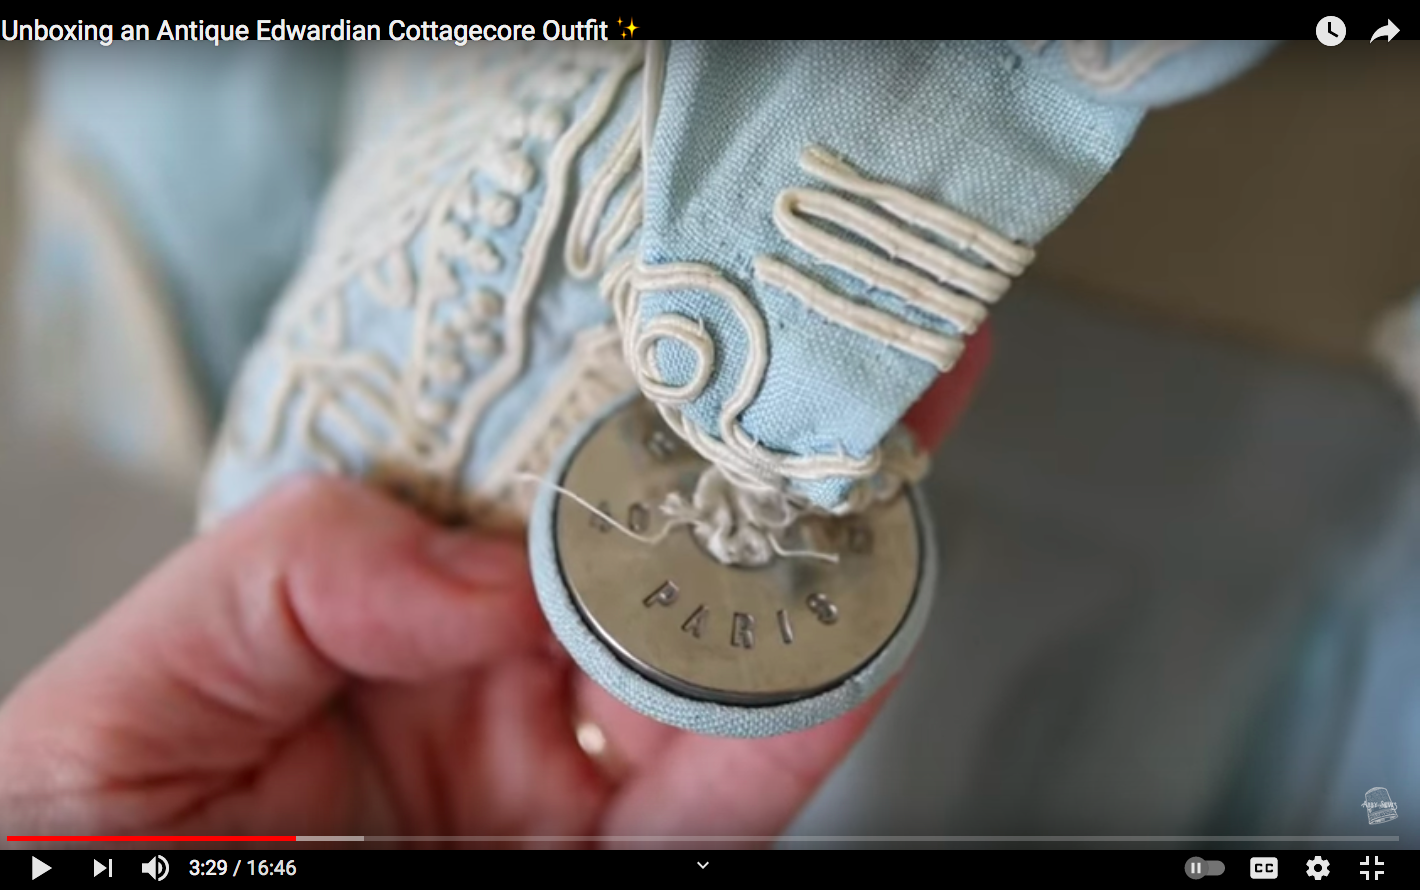 YouTube still of a metal button inscribed with the term 'Paris' on an Edwardian outfit